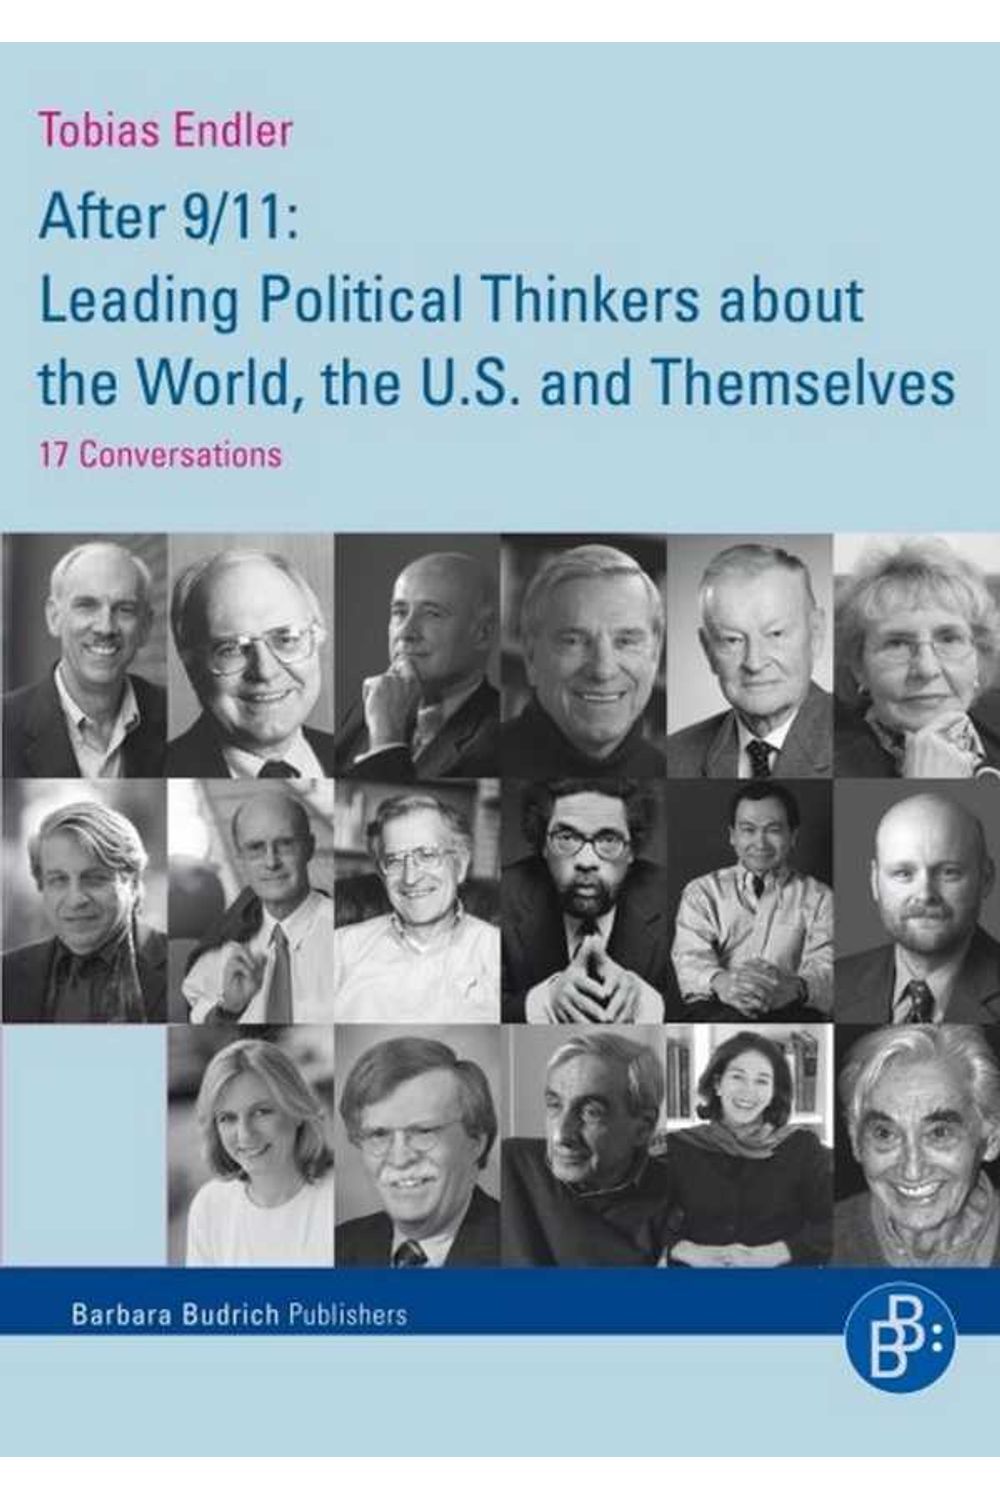 bw-after-911-leading-political-thinkers-about-the-world-the-us-and-themselves-verlag-barbara-budrich-9783866496859